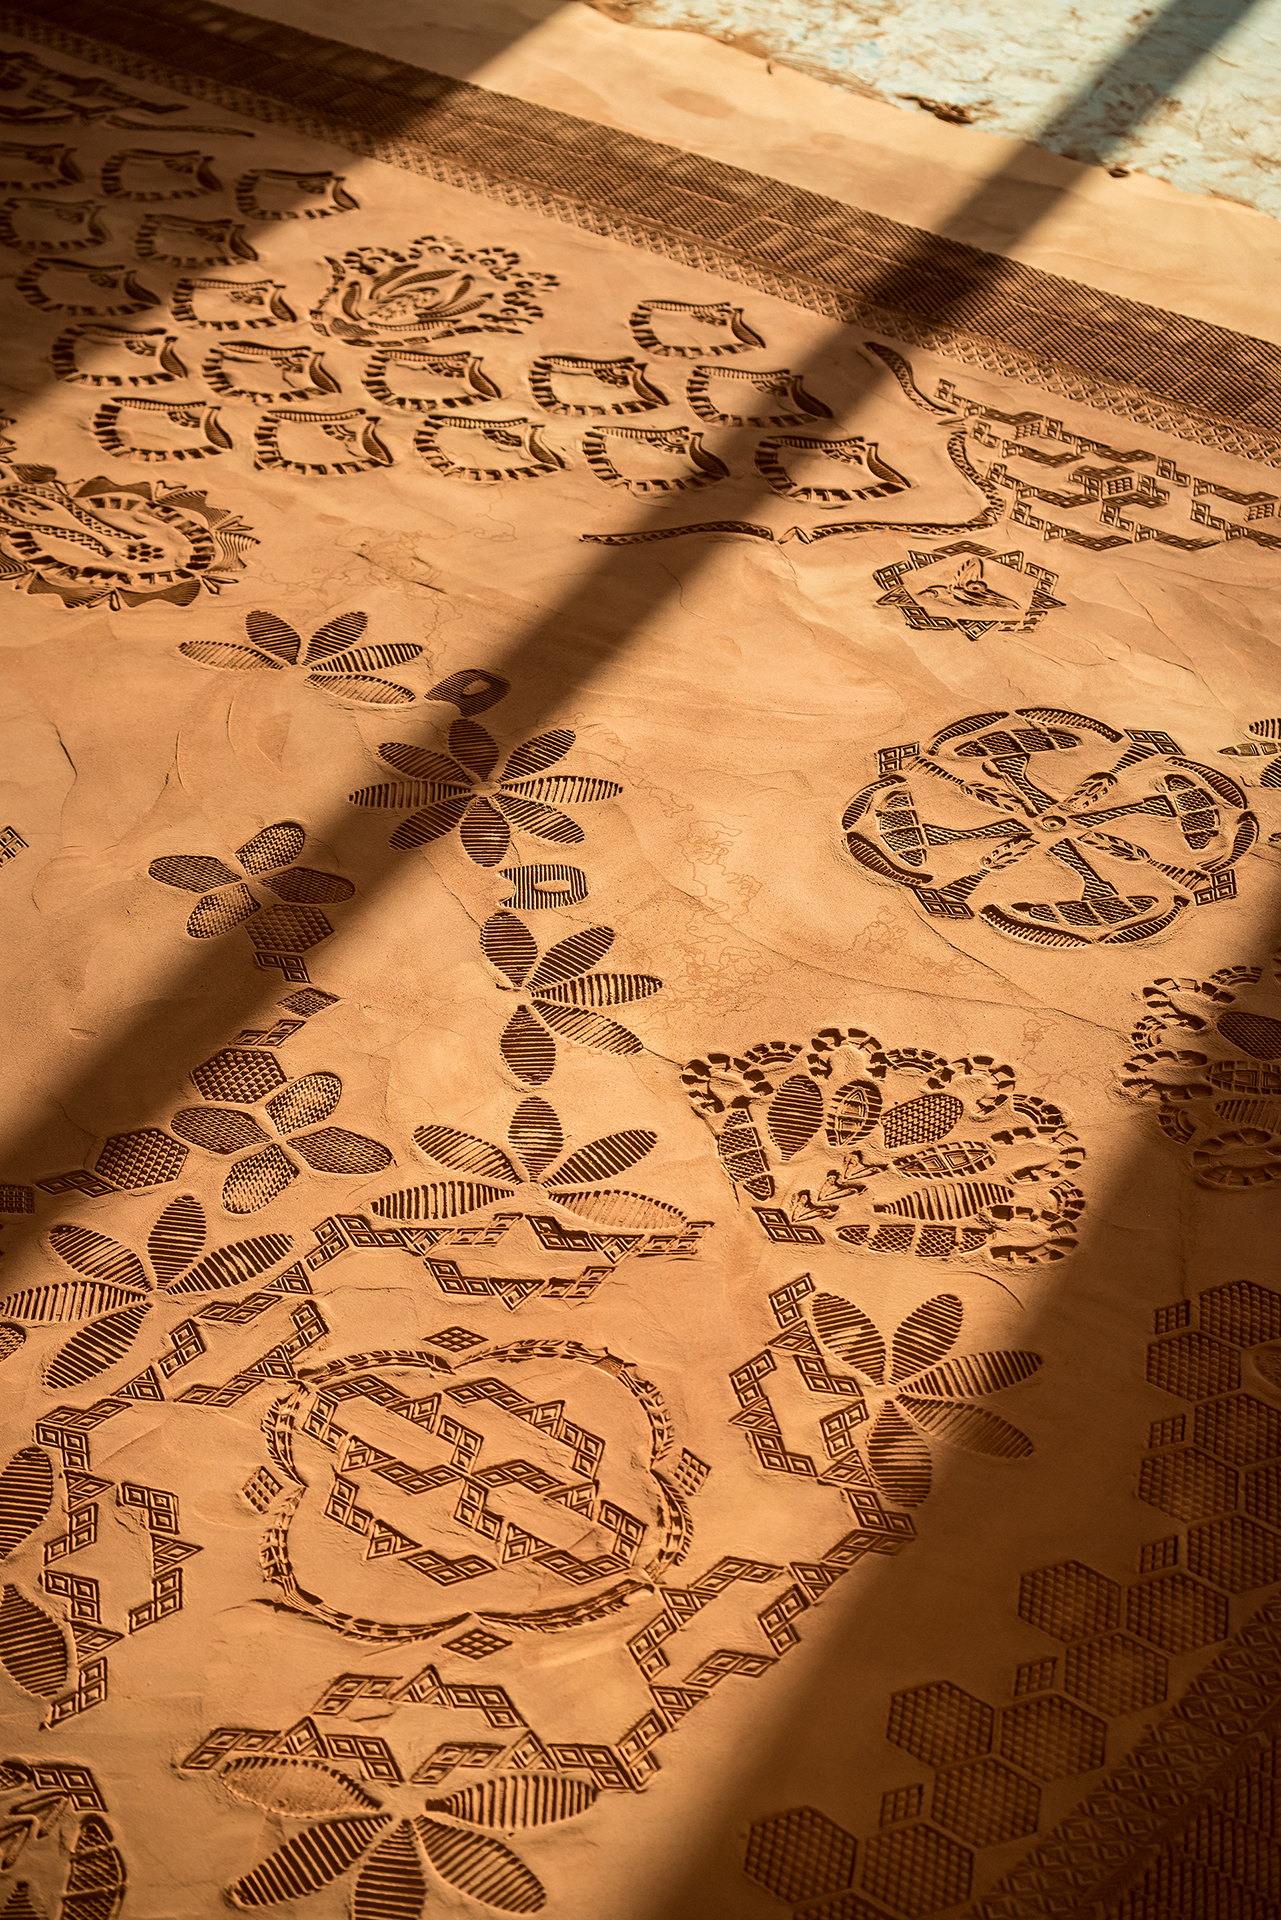 Detail of a monumental, low relief sculpture mimicking an intricate patterned rug, made with modified shoe soles imprinting ground & sifted Oklahoma red dirt